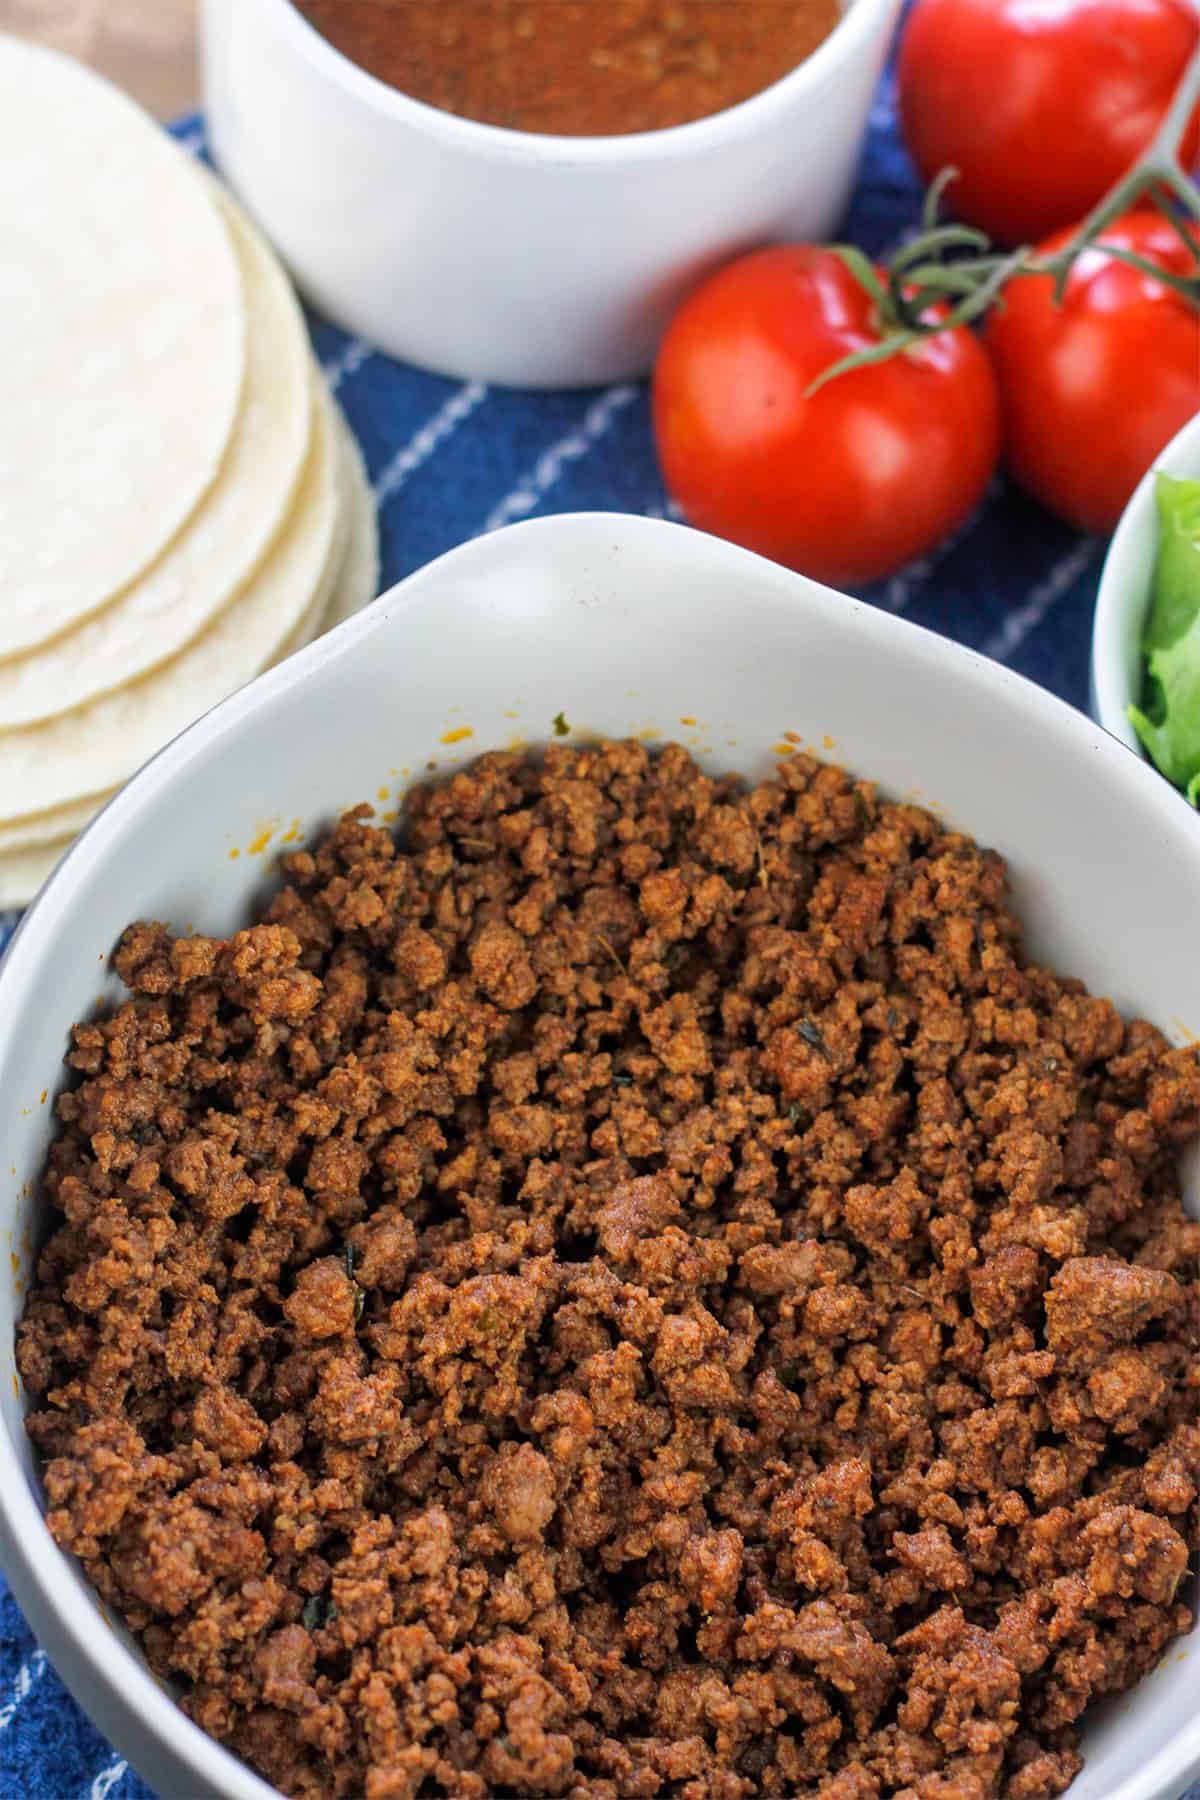 Cooked ground beef seasoned with DIY taco seasoning in a bowl.